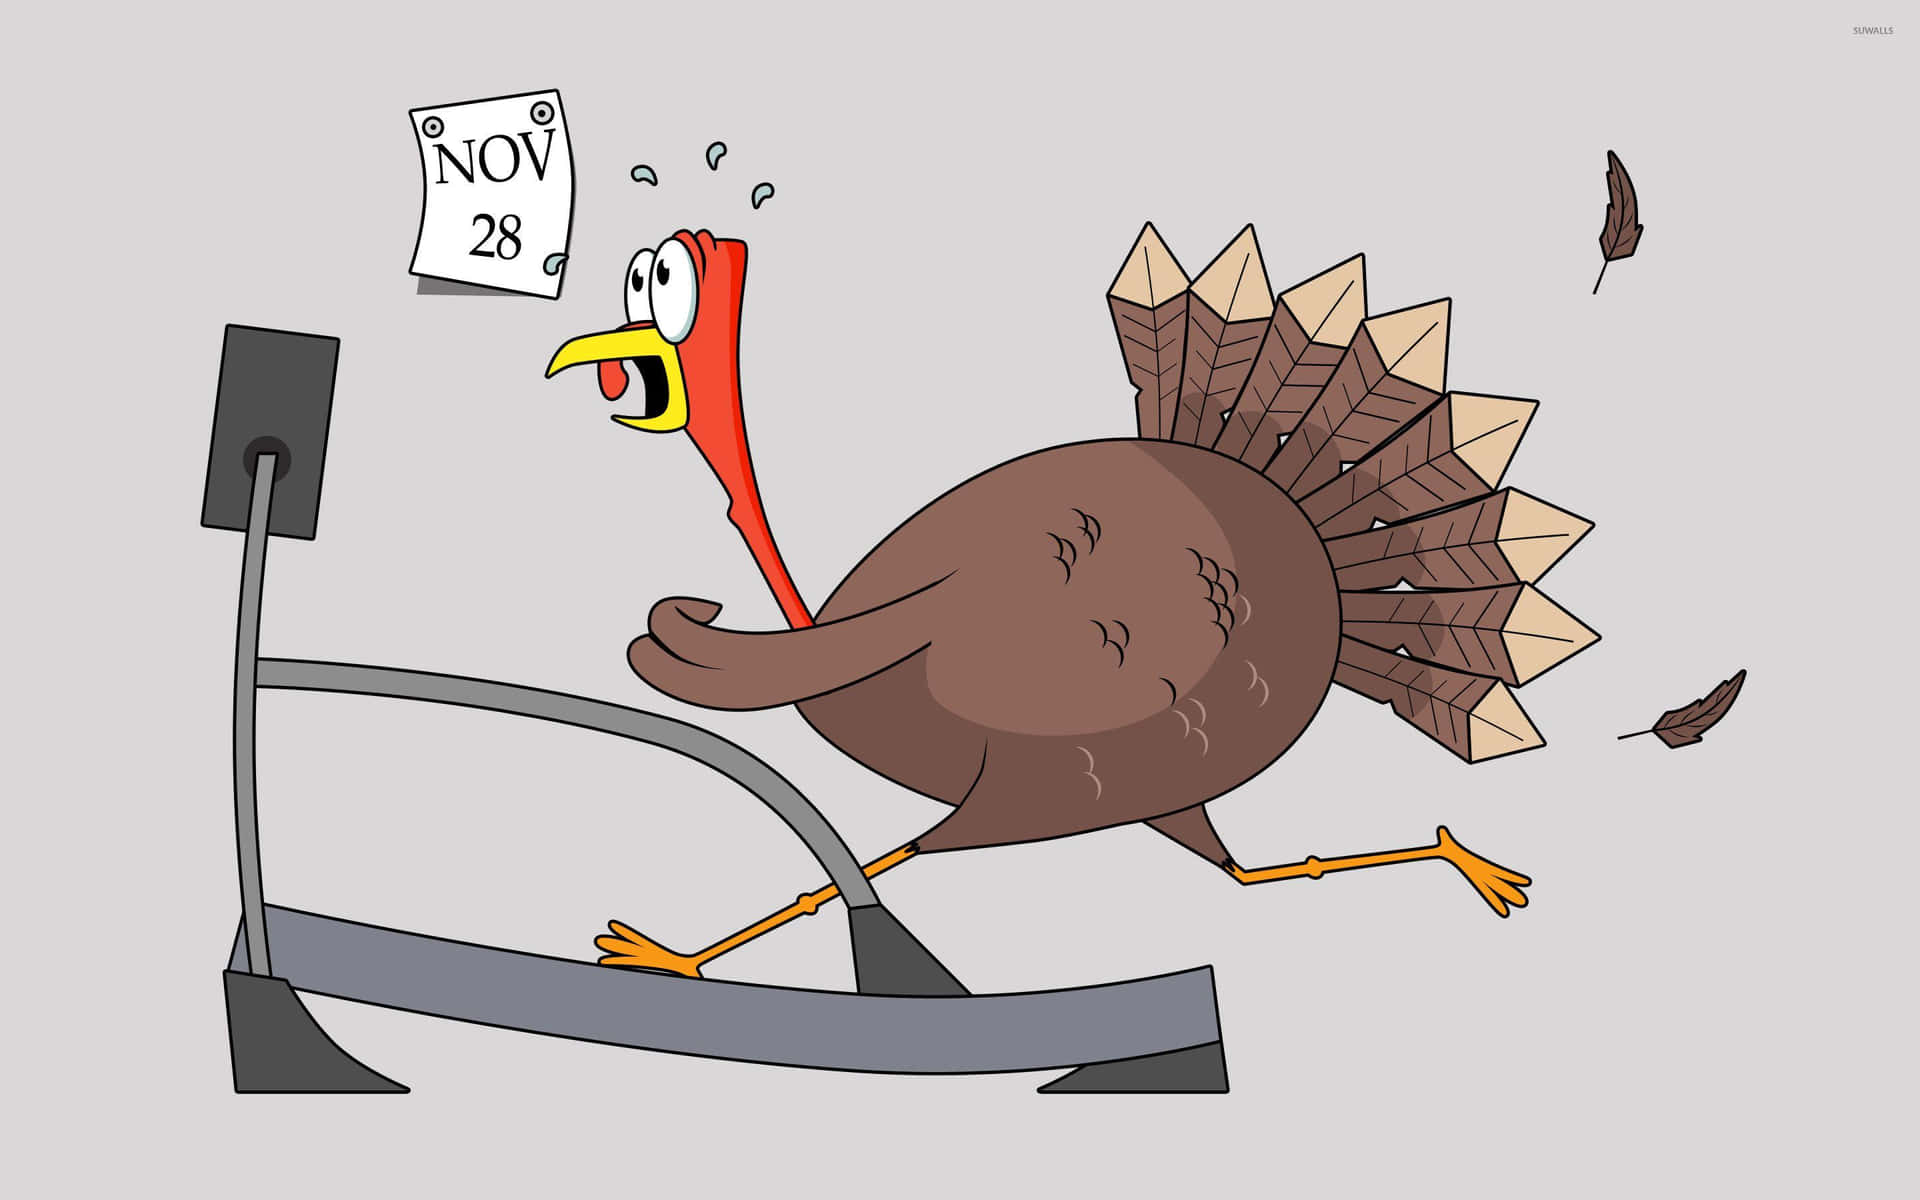 Celebrate the Thanksgiving holiday with this festive cartoon turkey! Wallpaper